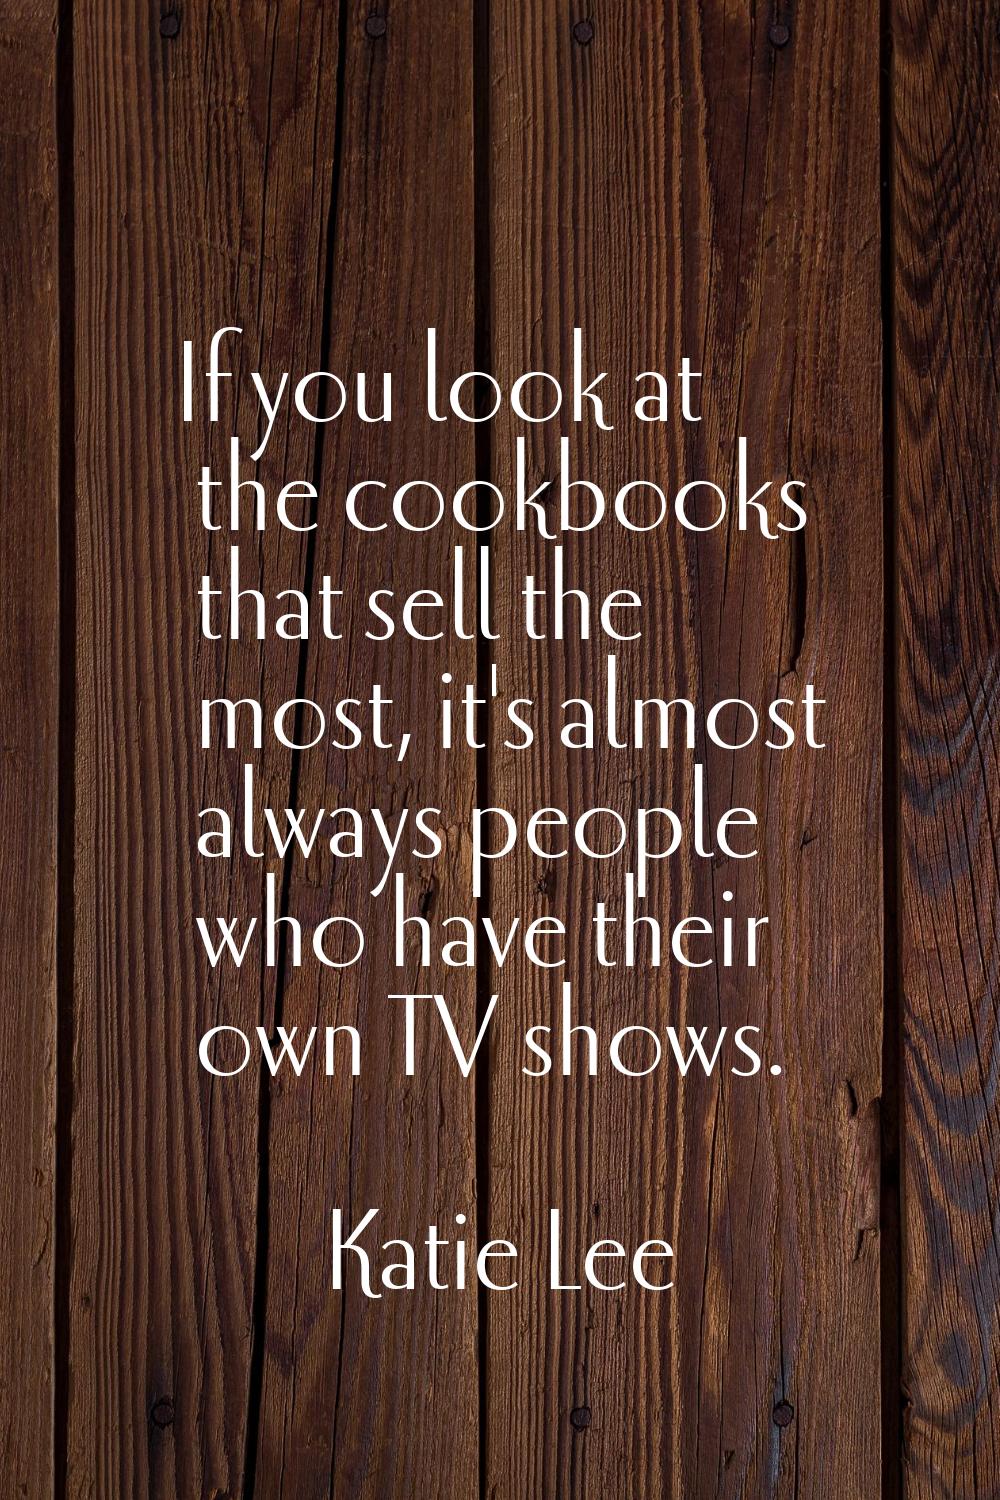 If you look at the cookbooks that sell the most, it's almost always people who have their own TV sh